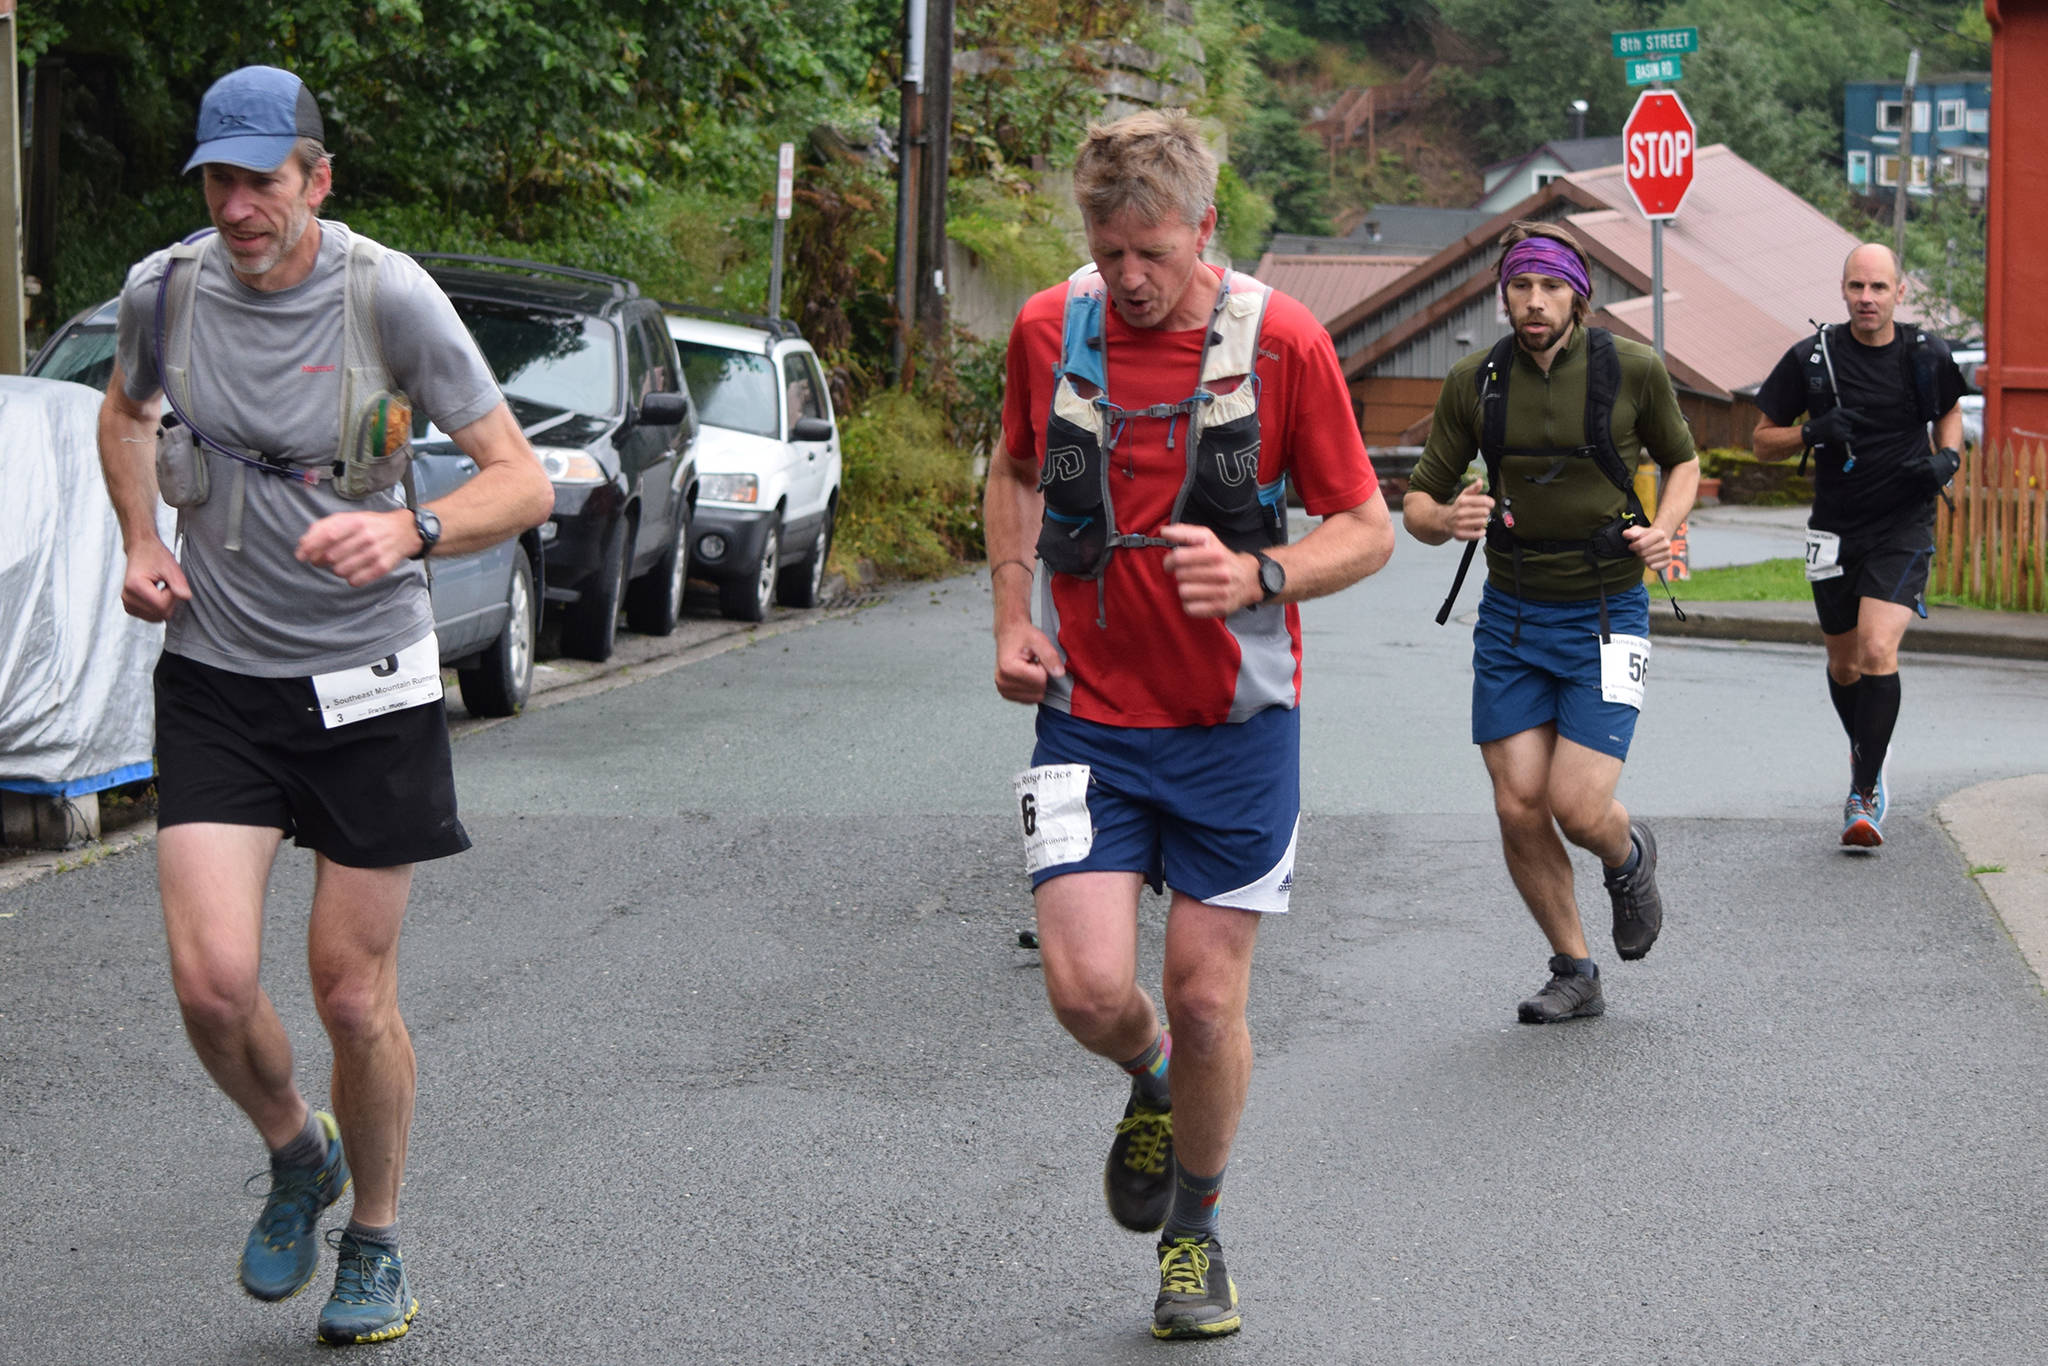 Franz Mueter, left and Alex Andrews lead a group of runners up Basin Road at the start of the Juneau Ridge Race on Saturday, July 20, 2019. Over 60 runners participated in the 15-mile mountain running race that featured approximately 5,000 feet of elevation gain. (Nolin Ainsworth | Juneau Empire)